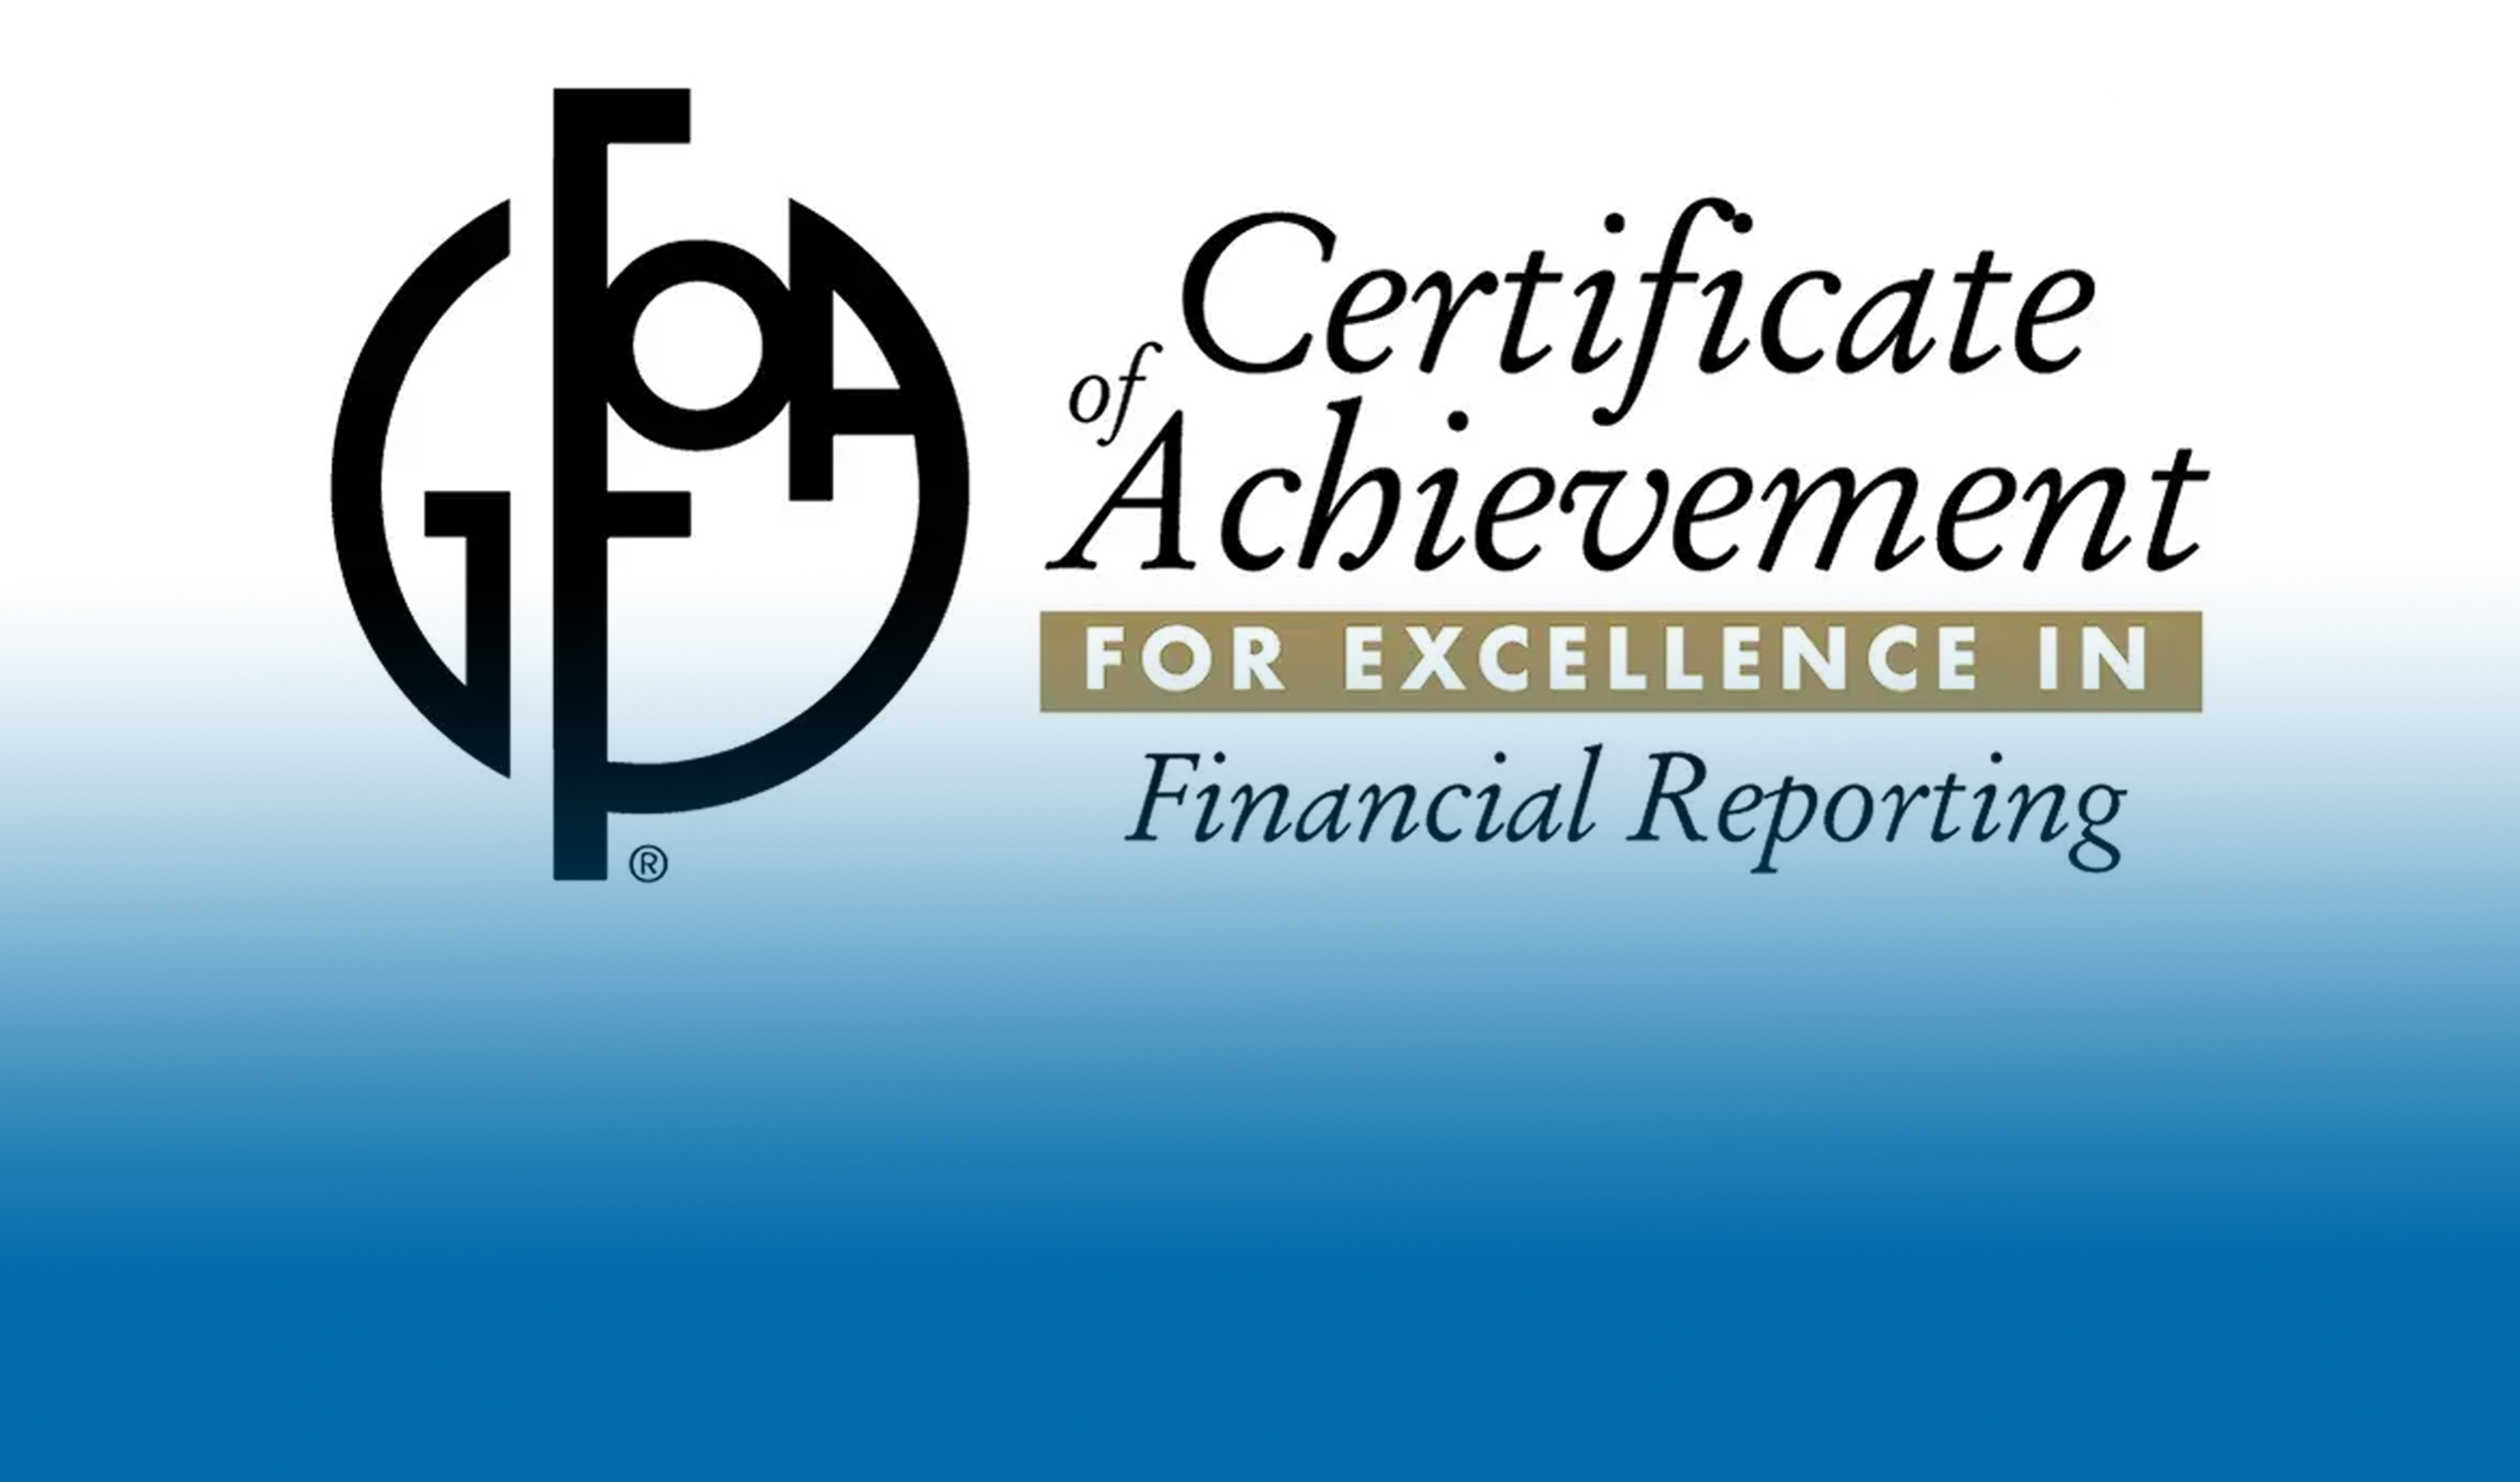 Certificate of Achievement for Financial Reporting - Fading Chyron